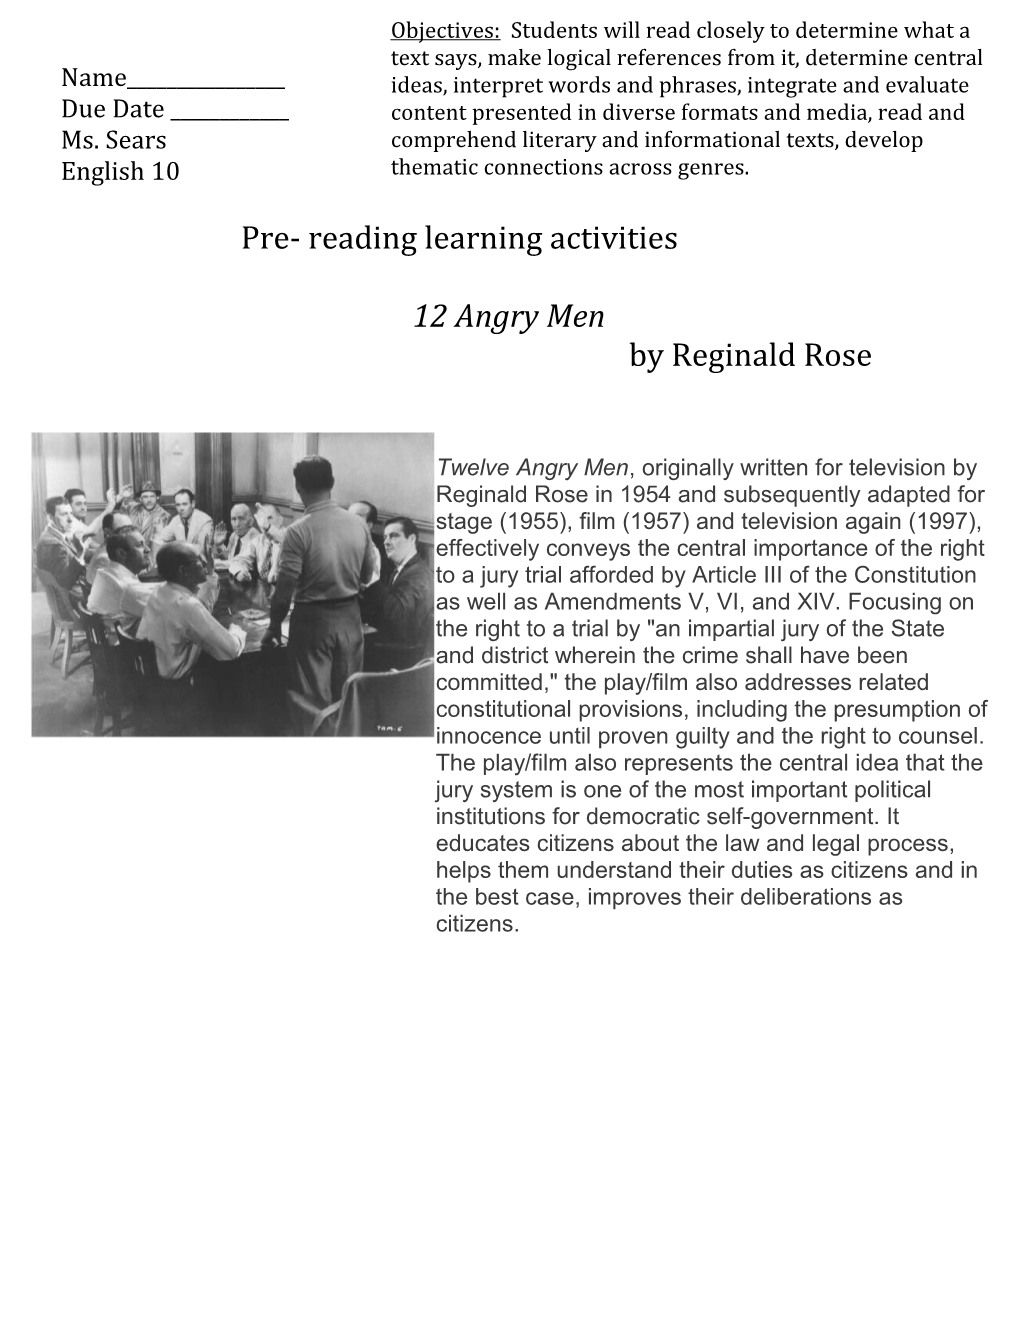 Pre- Reading Learning Activities